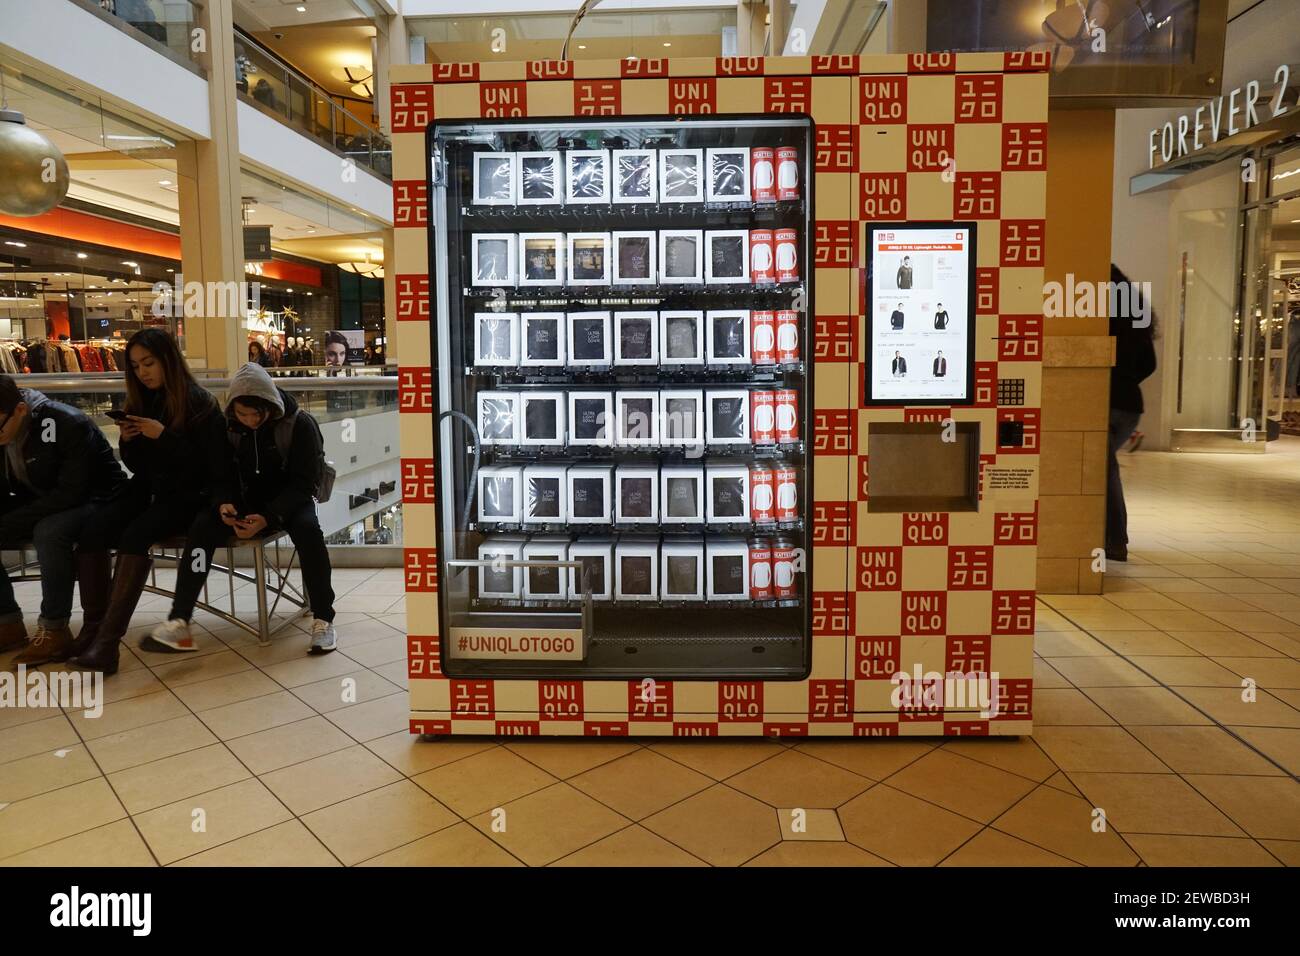 A Uniqlo vending machine dispenses cold weather clothing the Queens Center  Mall in the borough of Queens in New York on Sunday, December 17, 2017, a  week before Christmas. Retailers are reporting